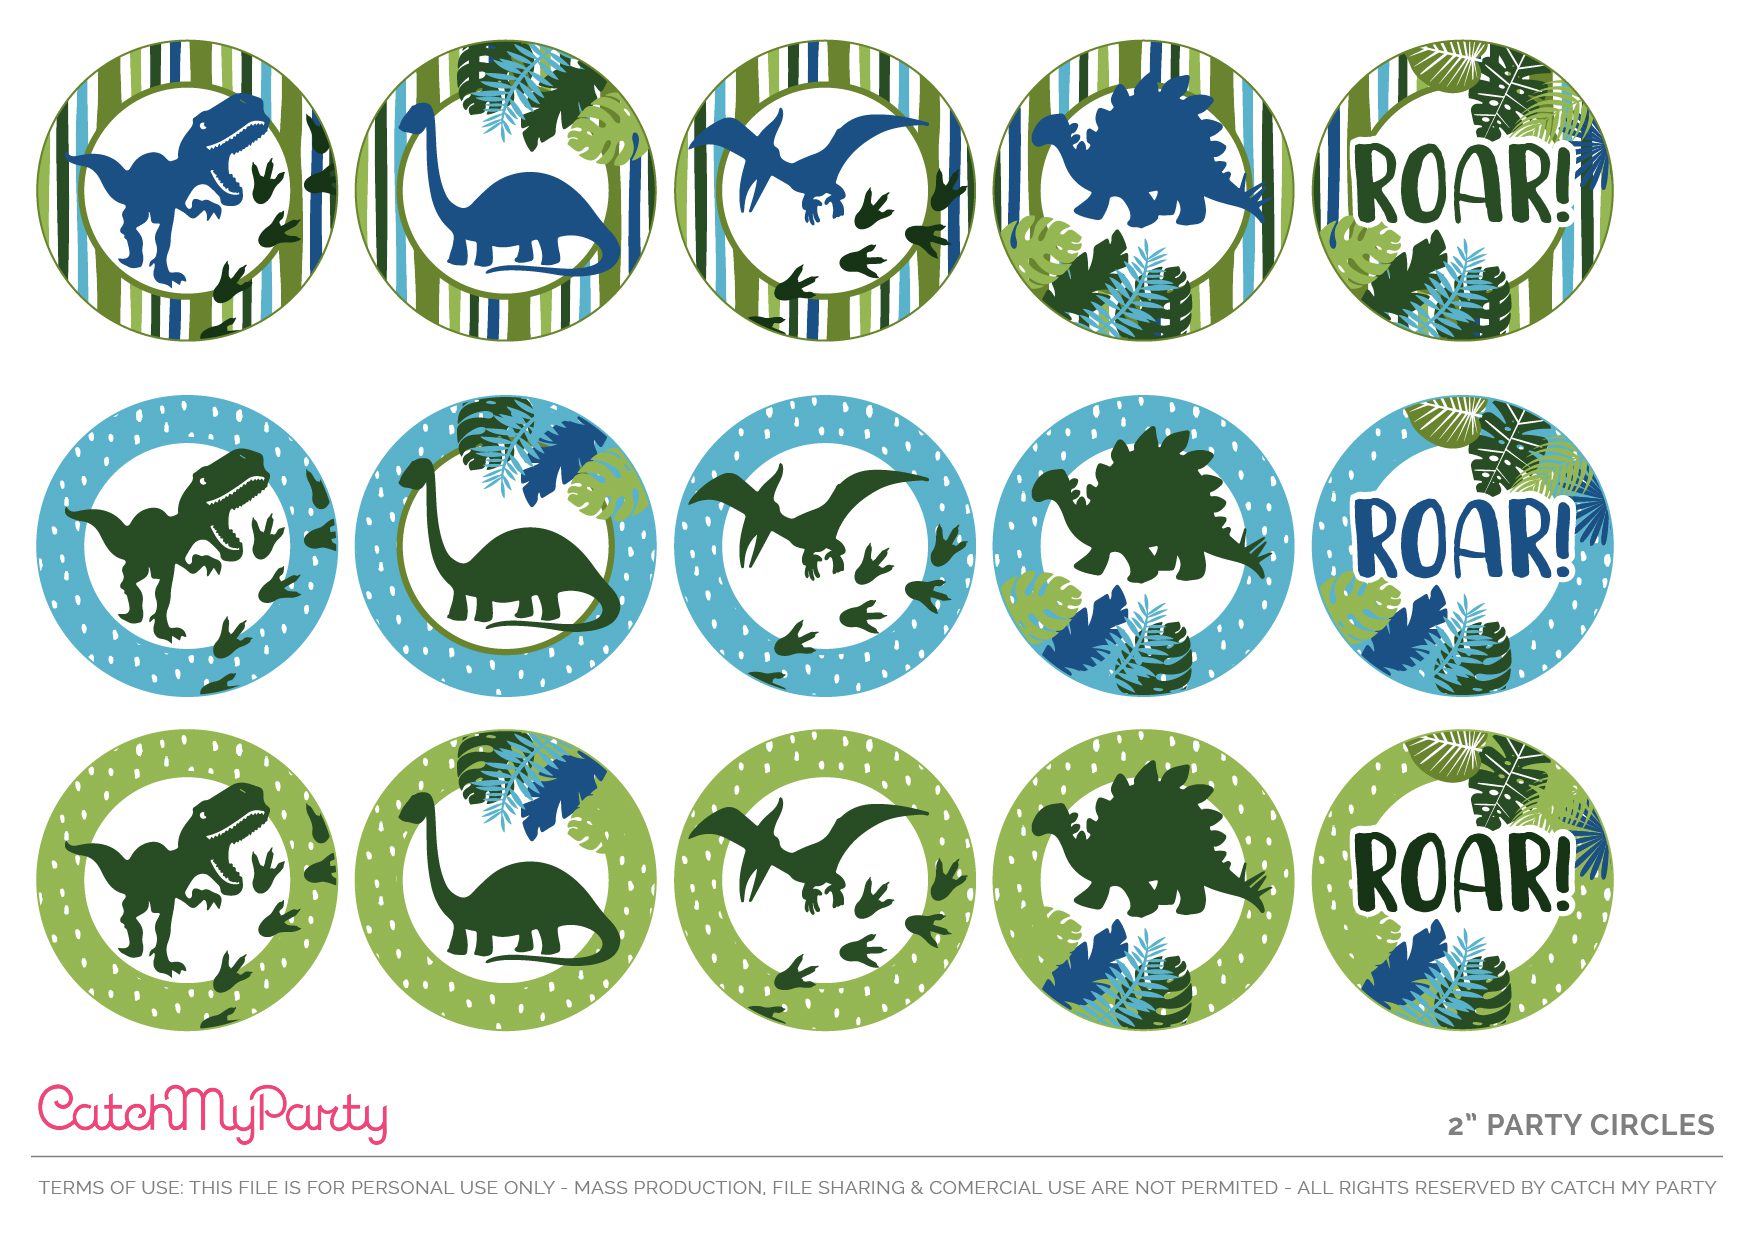 Download These Free Dinosaur Party Printables, Now - 2" Party Circles